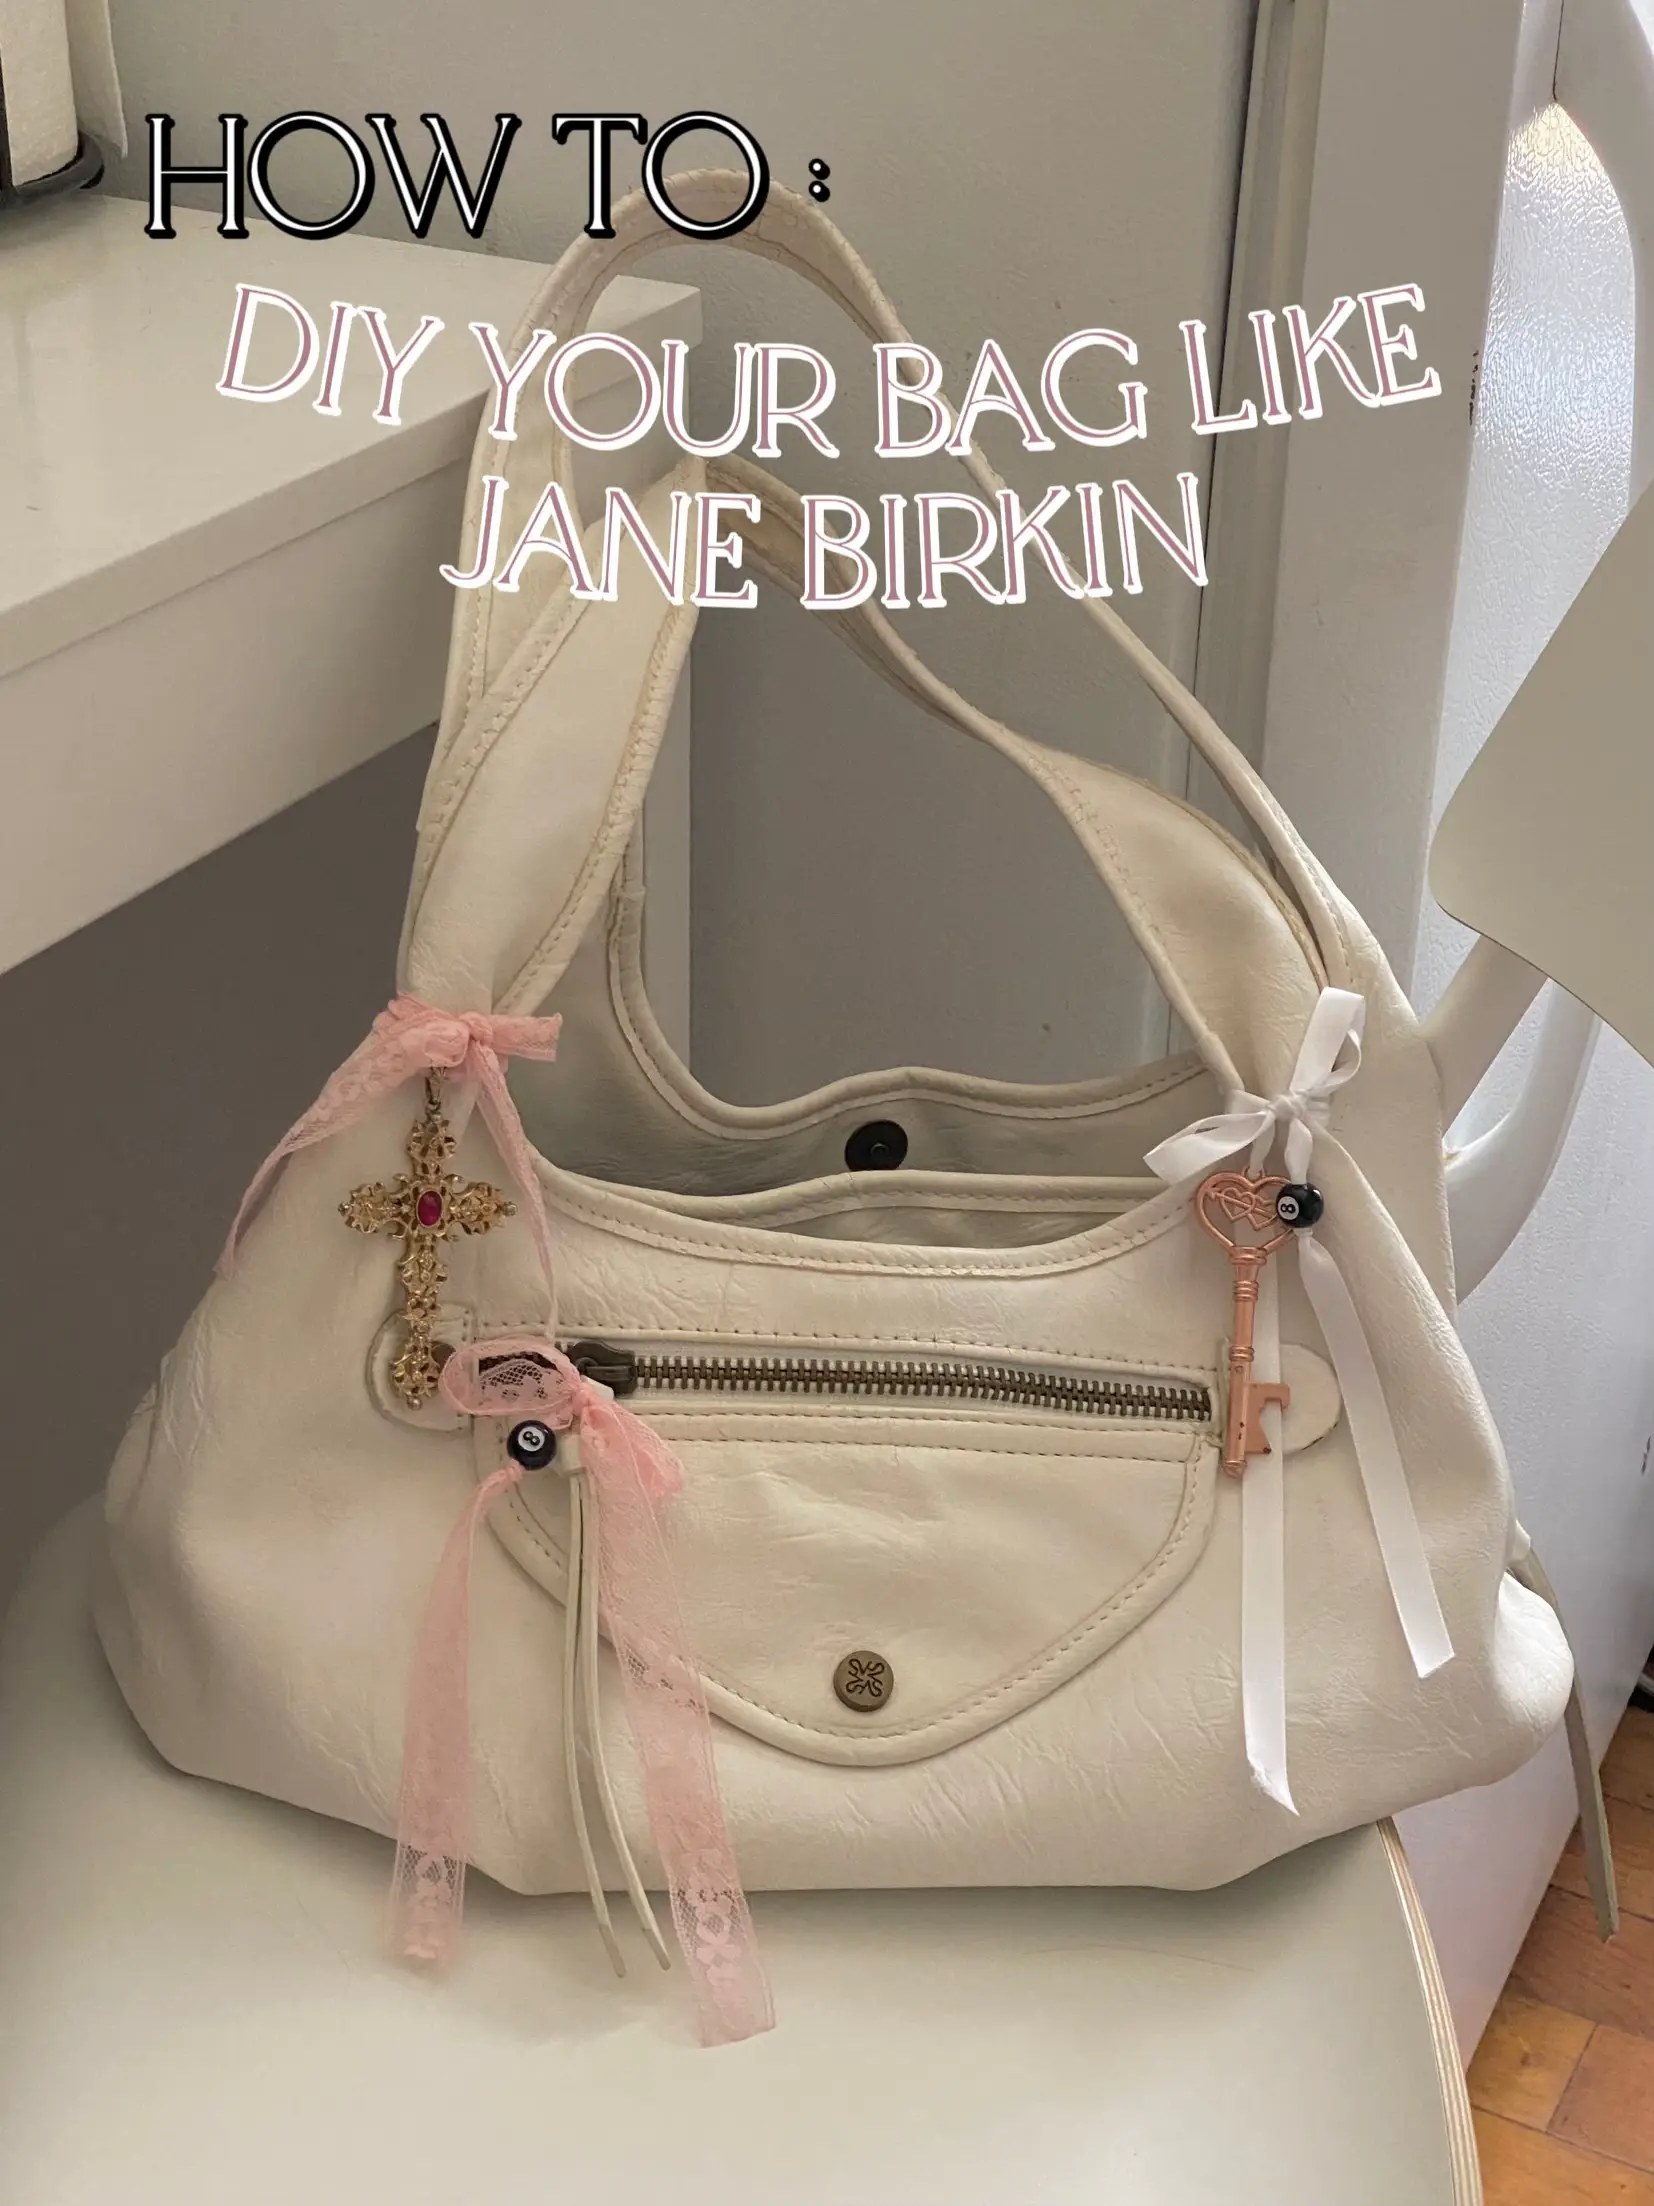 WHAT'S IN MY BAG! YOU FAKE LIKE THIS BIRKIN! 